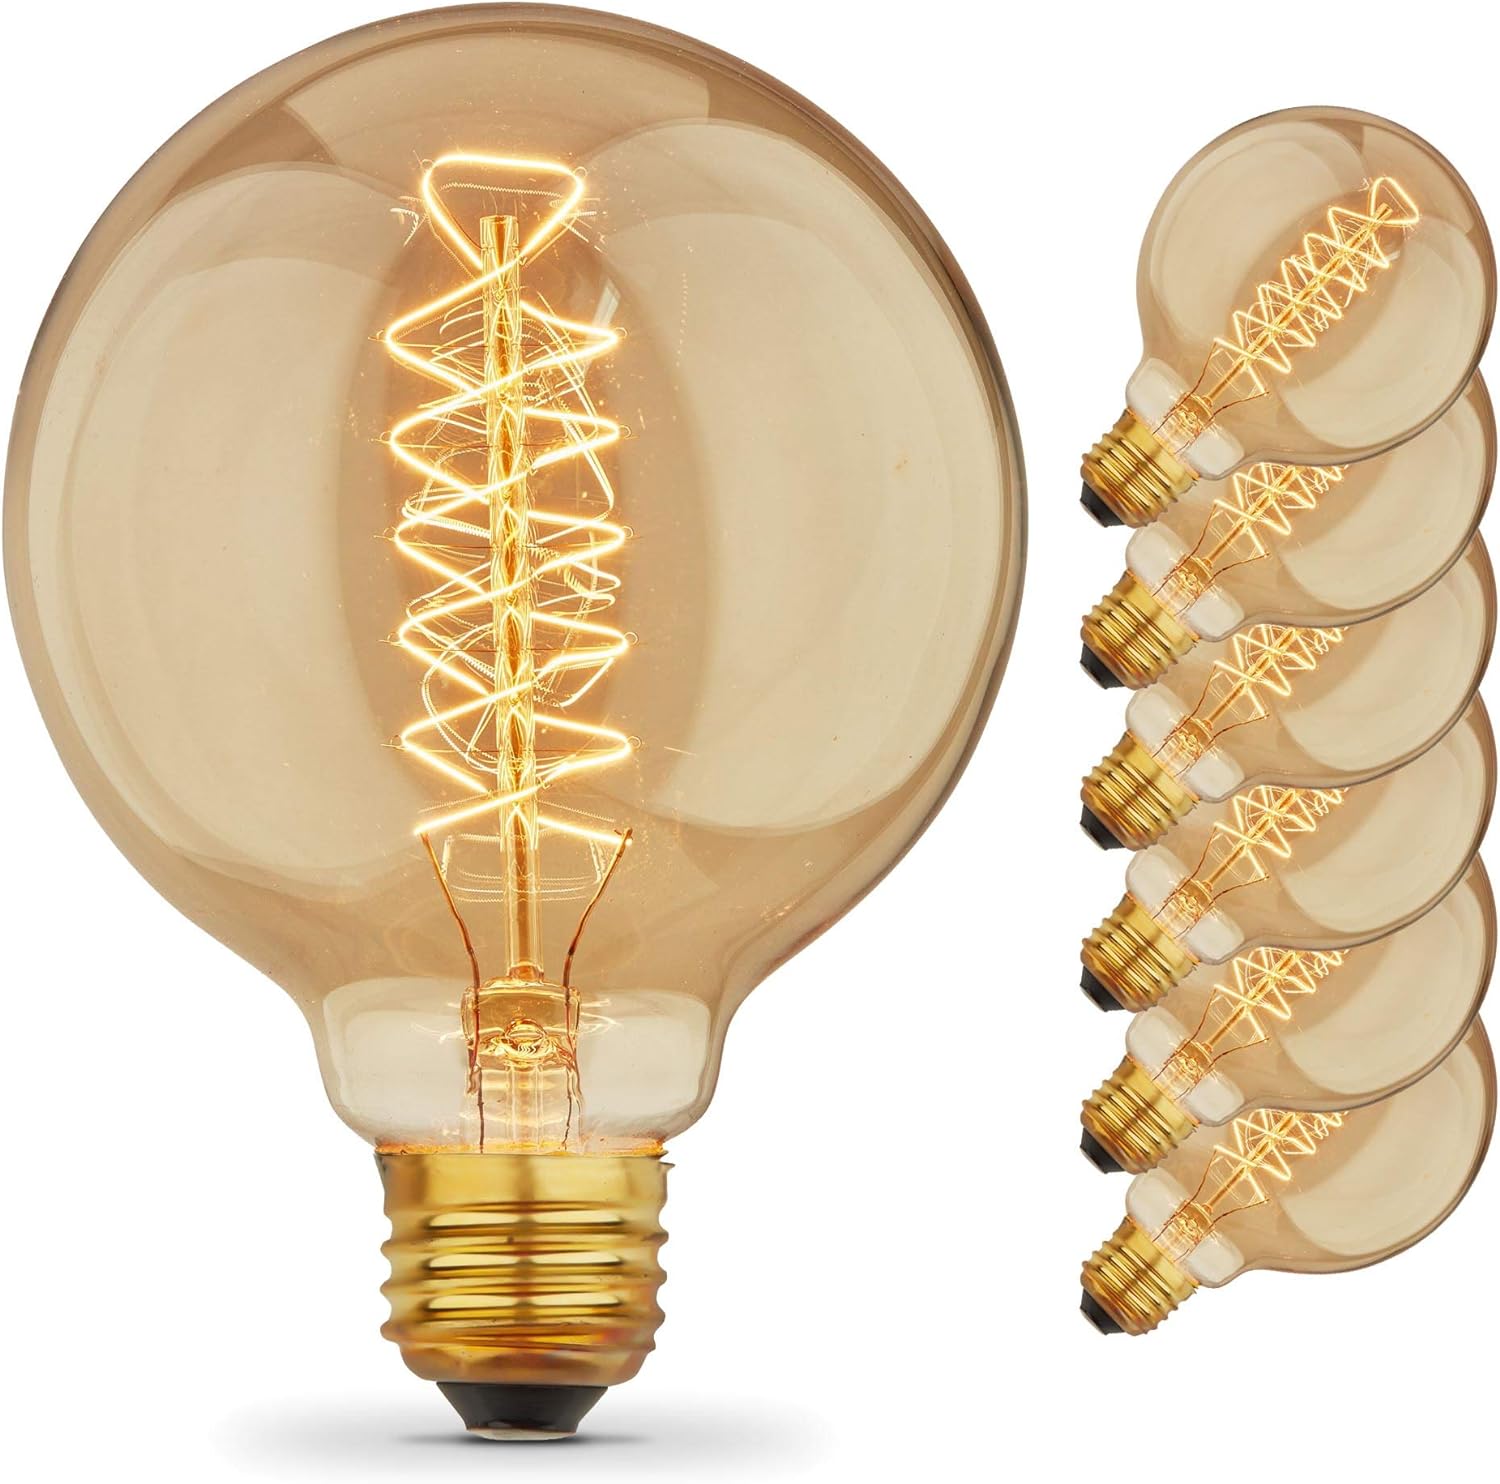 A light bulb with a glowing filament.